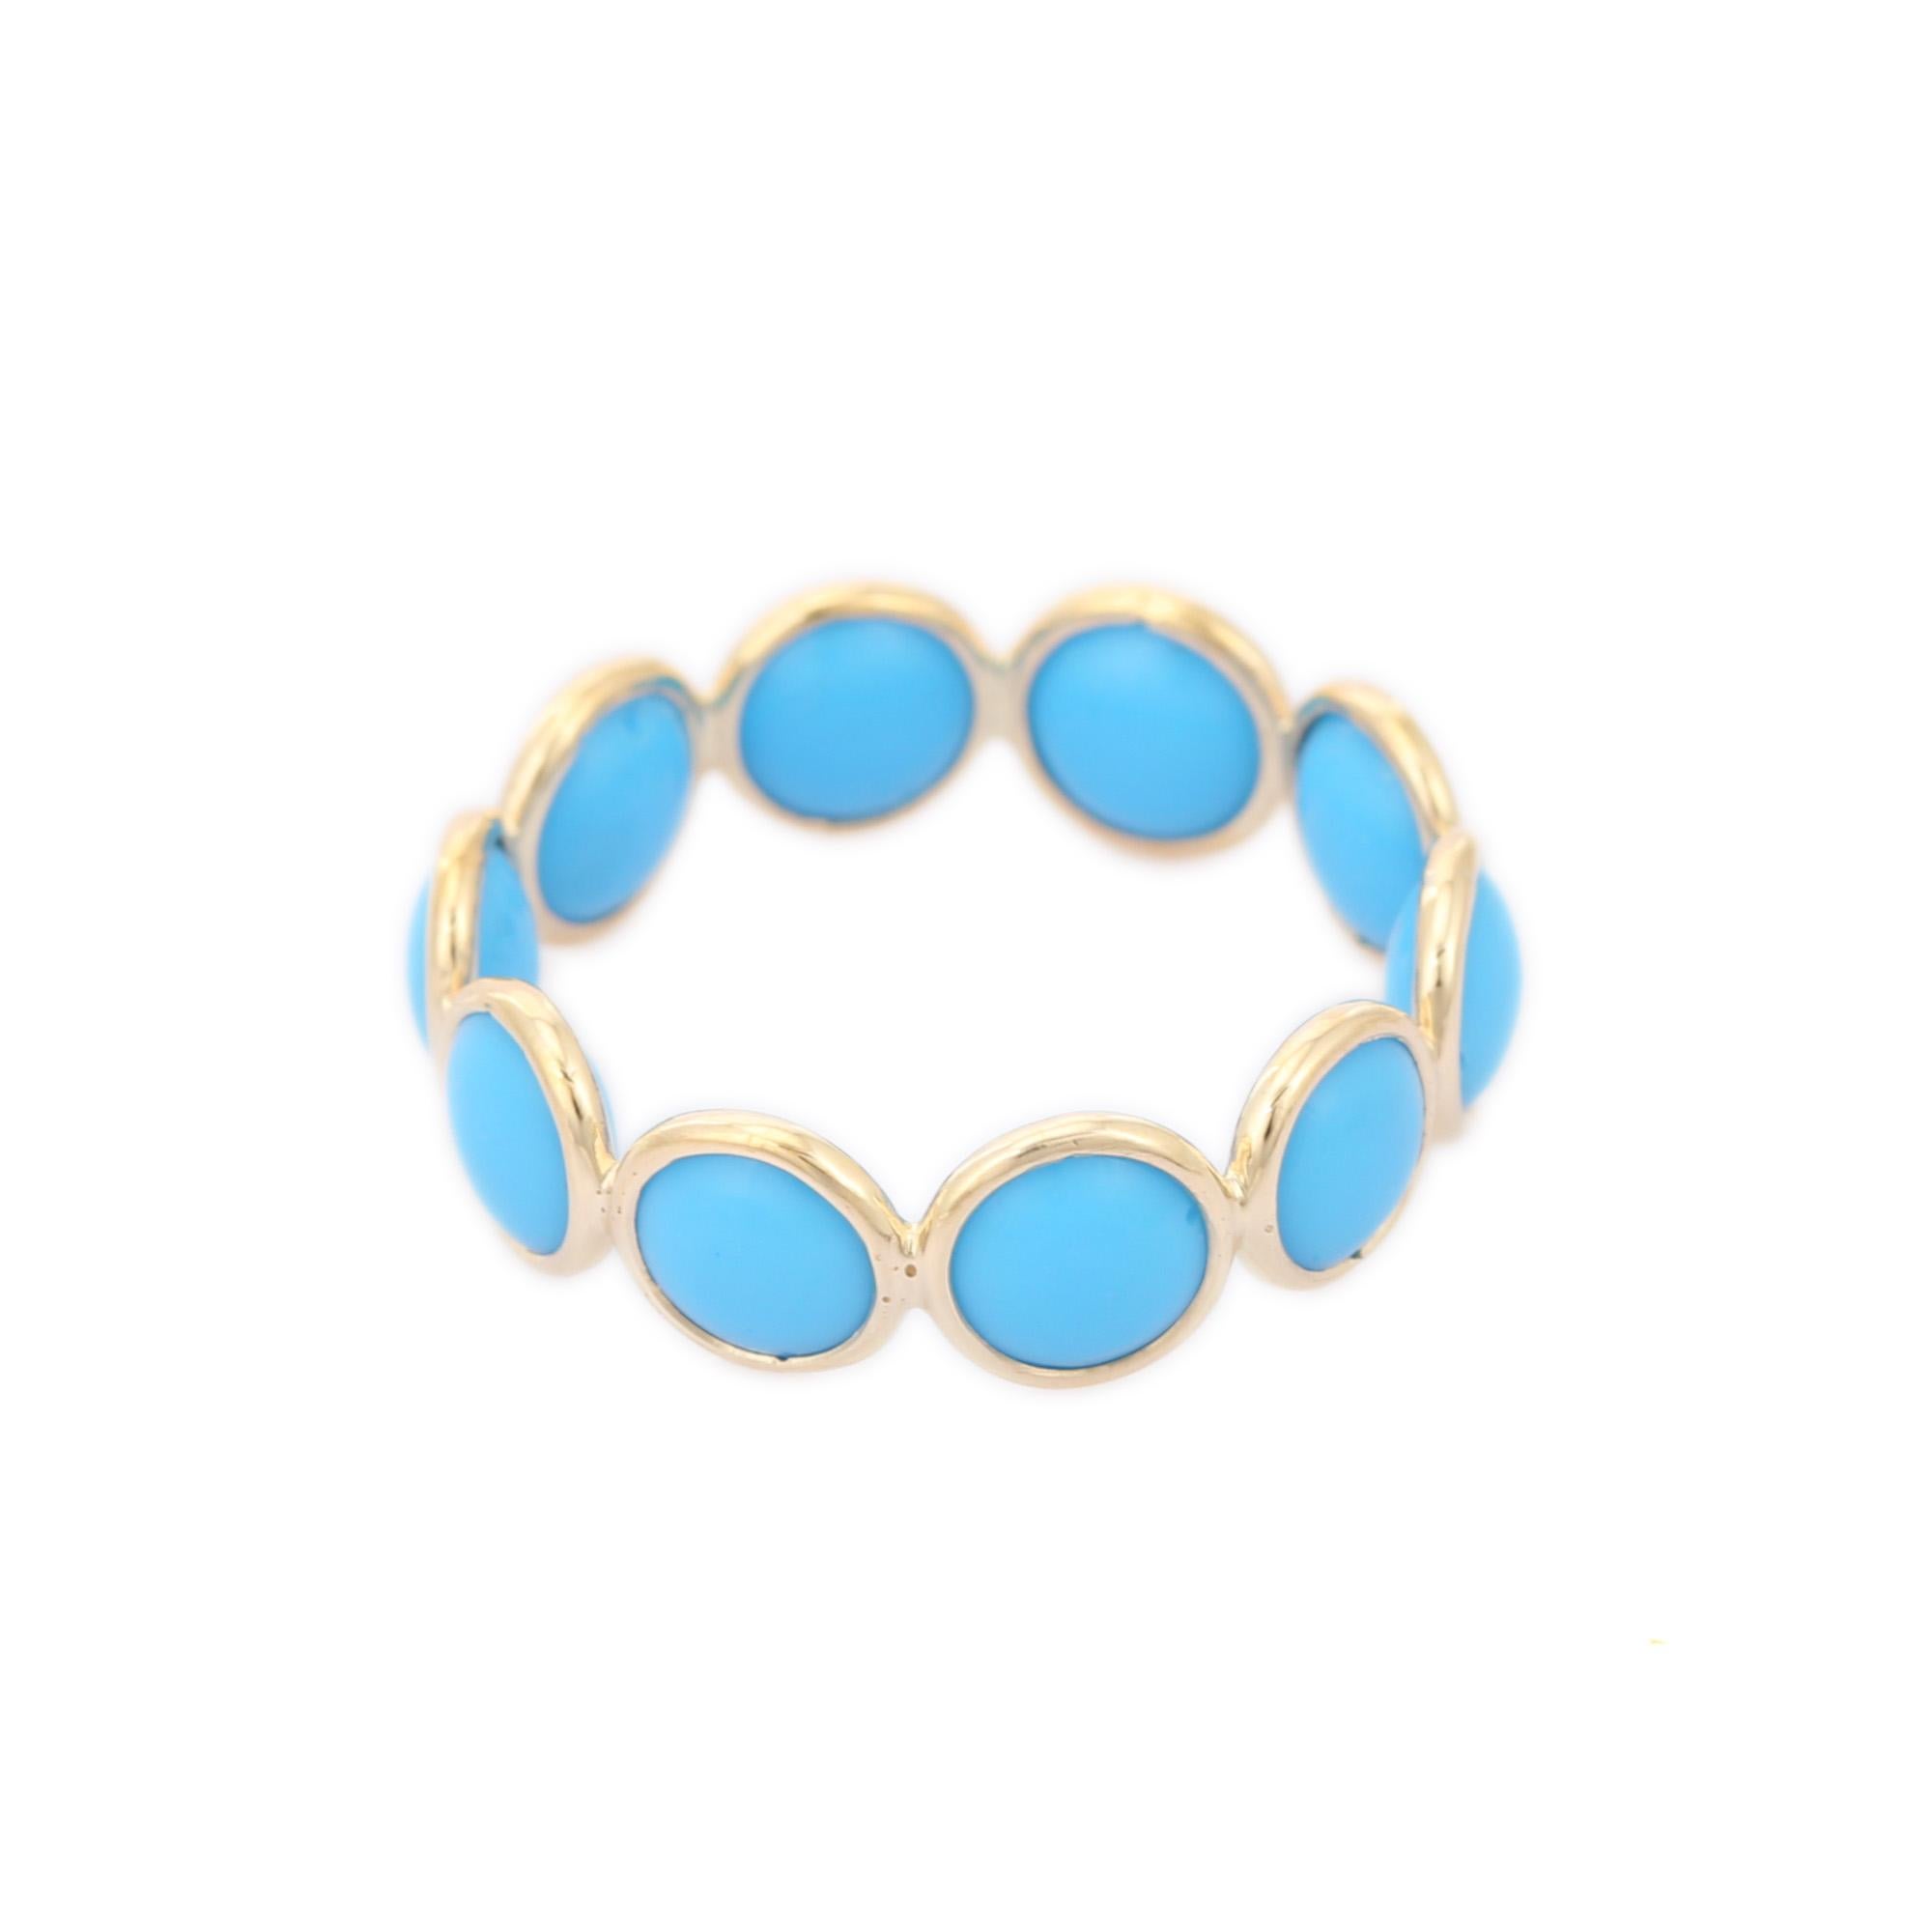 Turquoise Eternity Band in 18K Yellow Gold 4